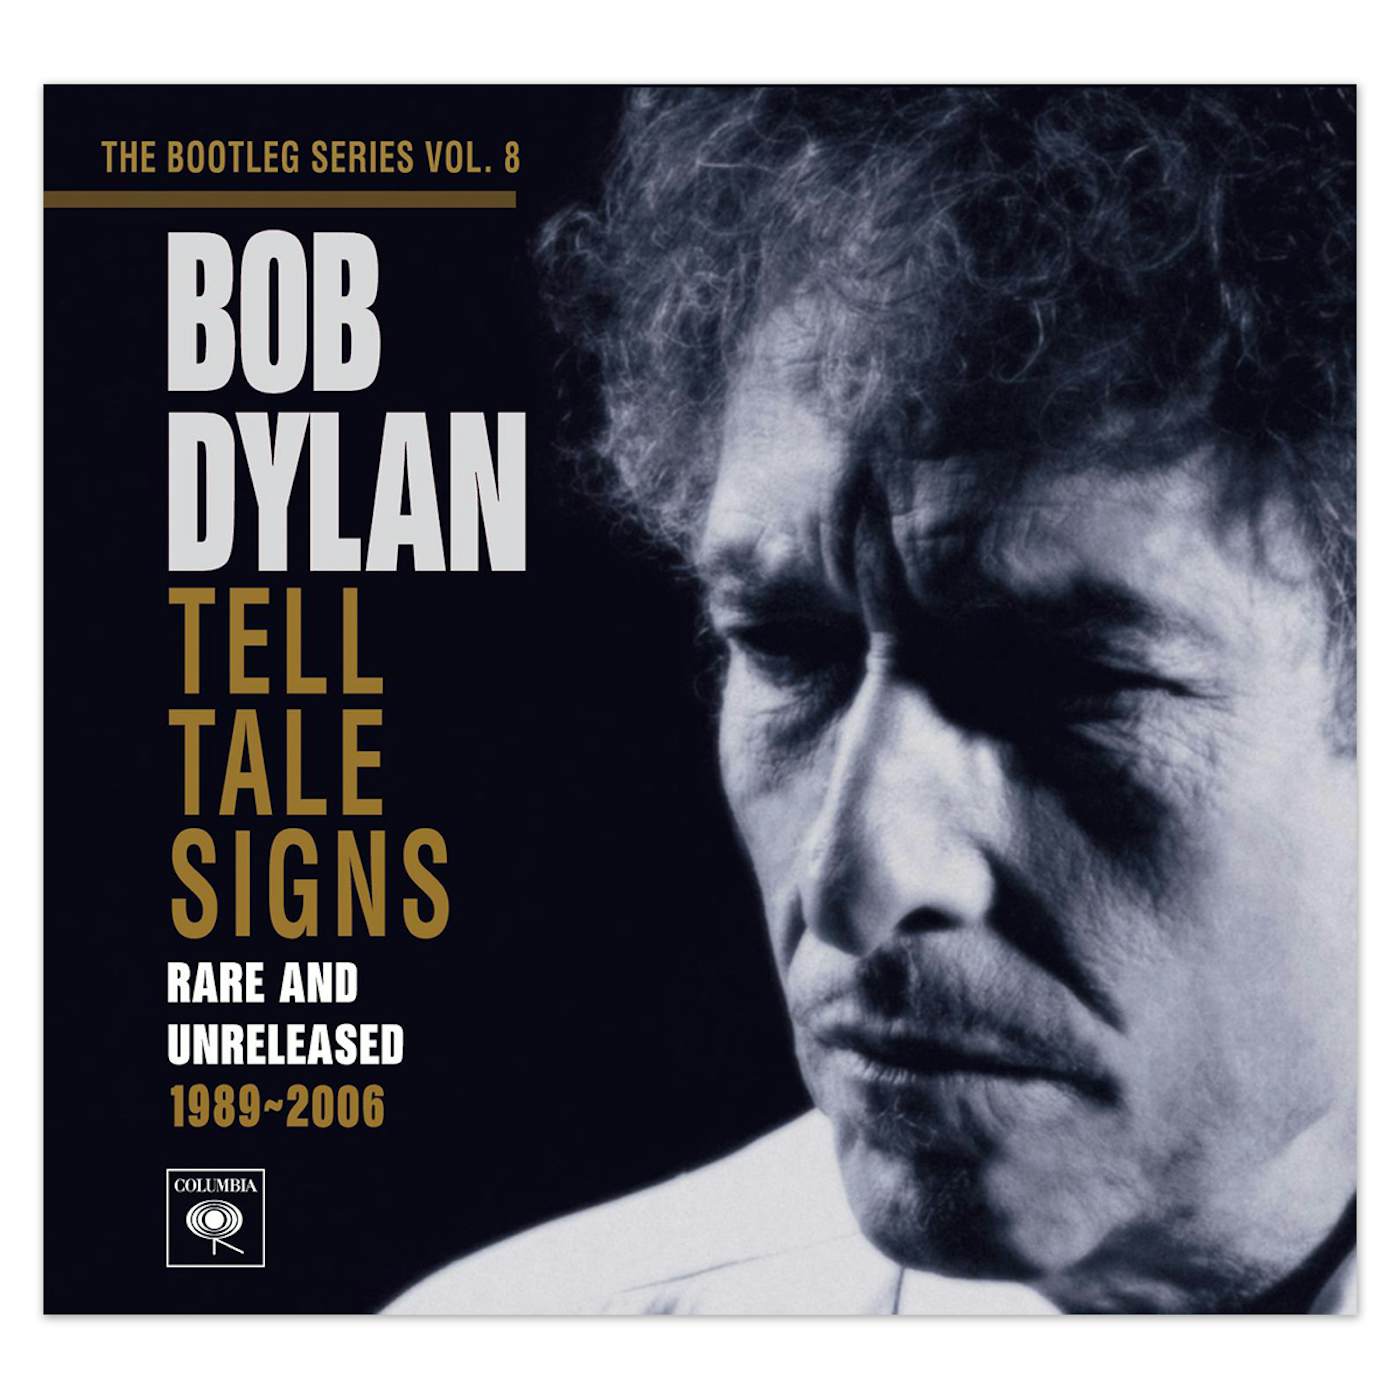 The Bootleg Series, Vol 8: Tell Tale Signs Deluxe Edition CD